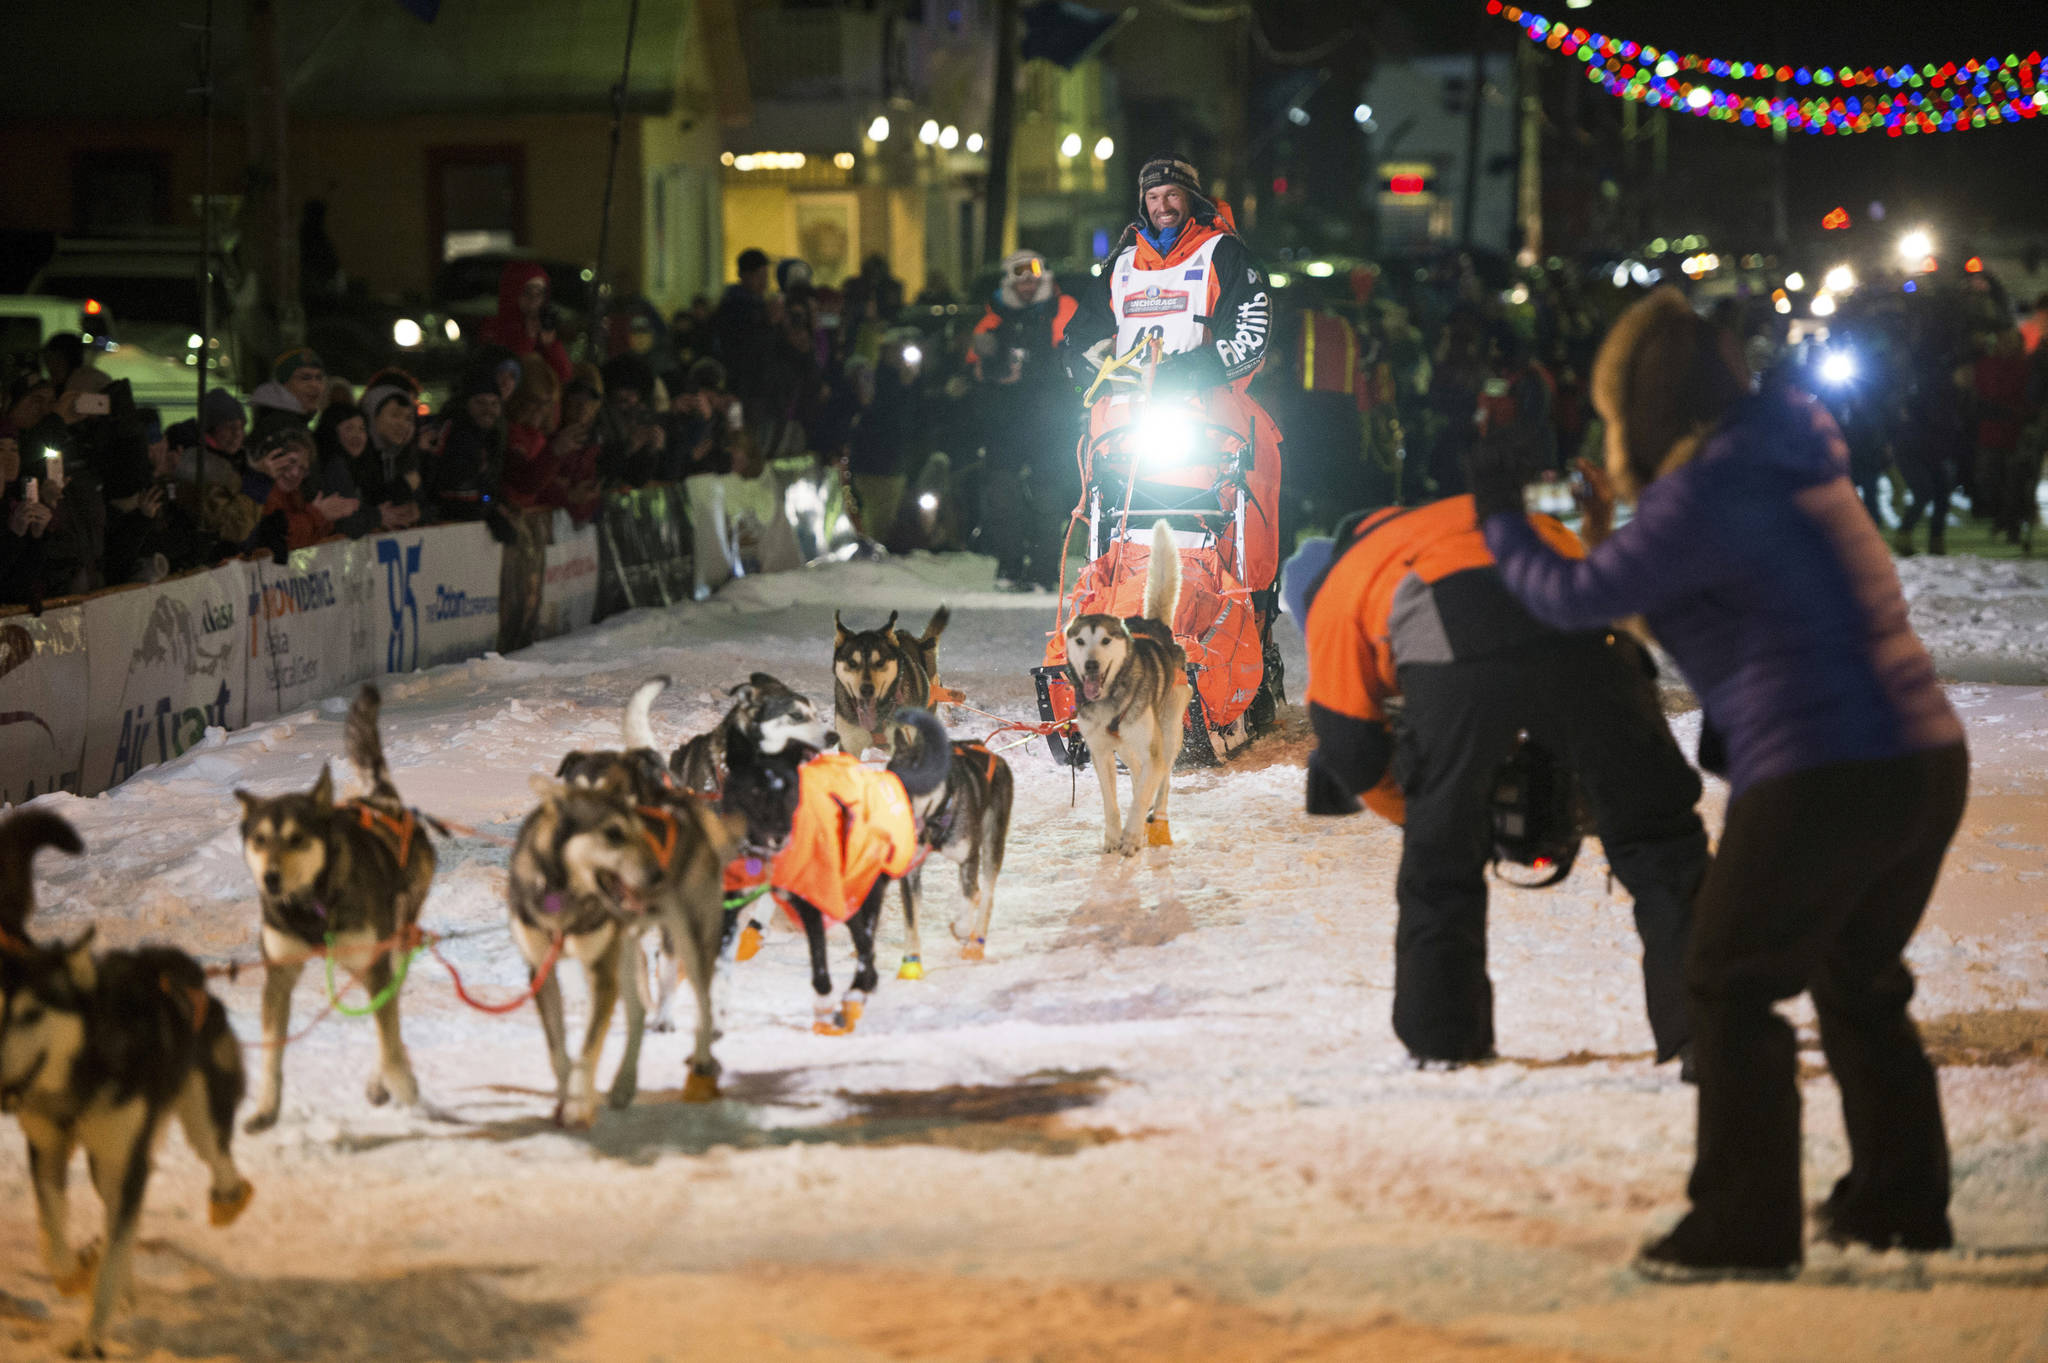 Thomas Waerner, of Norway, arrives in Nome in March to win the Iditarod Trail Sled Dog Race. The 2021 Iditarod Trail Sled Dog Race will be about 140 miles shorter than normal as a result of complications stemming from the coronavirus pandemic, race officials announced Friday, Dec. 18, 2020. The teams will no longer embark on a 1,000-mile (1,609-kilometer) journey to Nome but instead will take a roughly 860-mile (1,384-kilometer) loop that starts and ends in Willow. (Marc Lester / Anchorage Daily News)